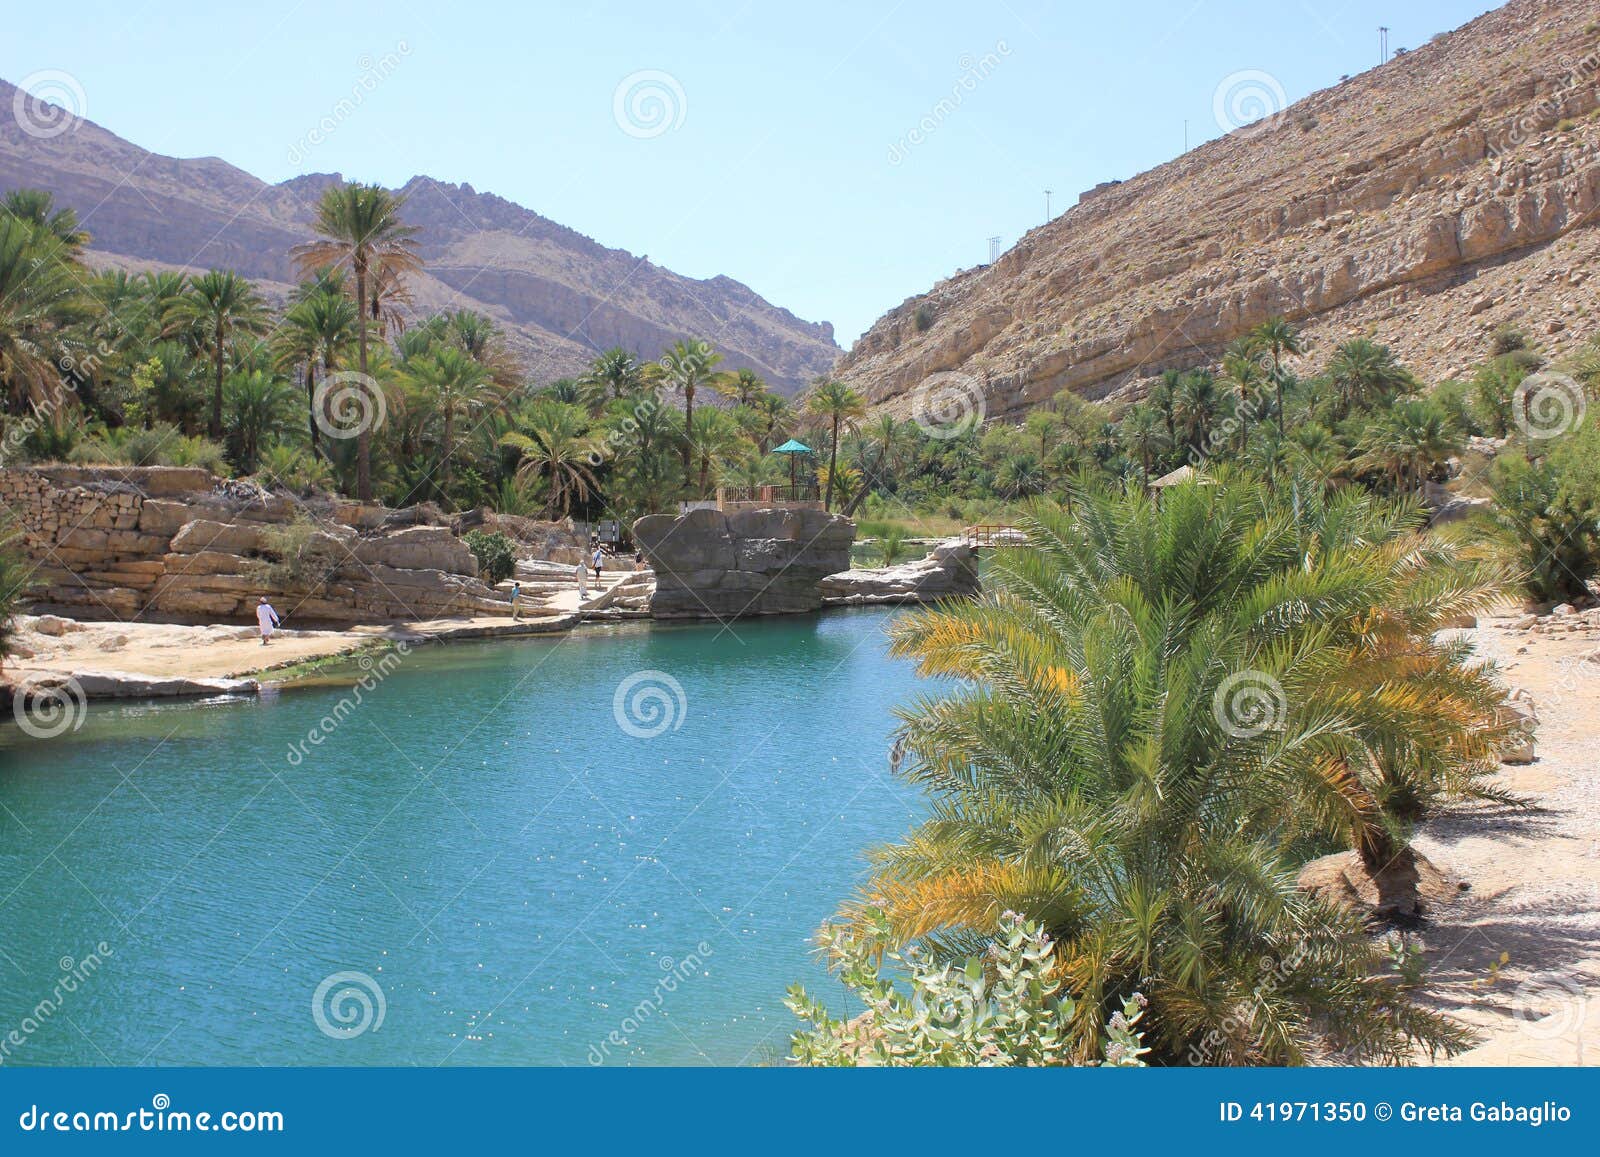 wadi in oman. a water paradise in the desert